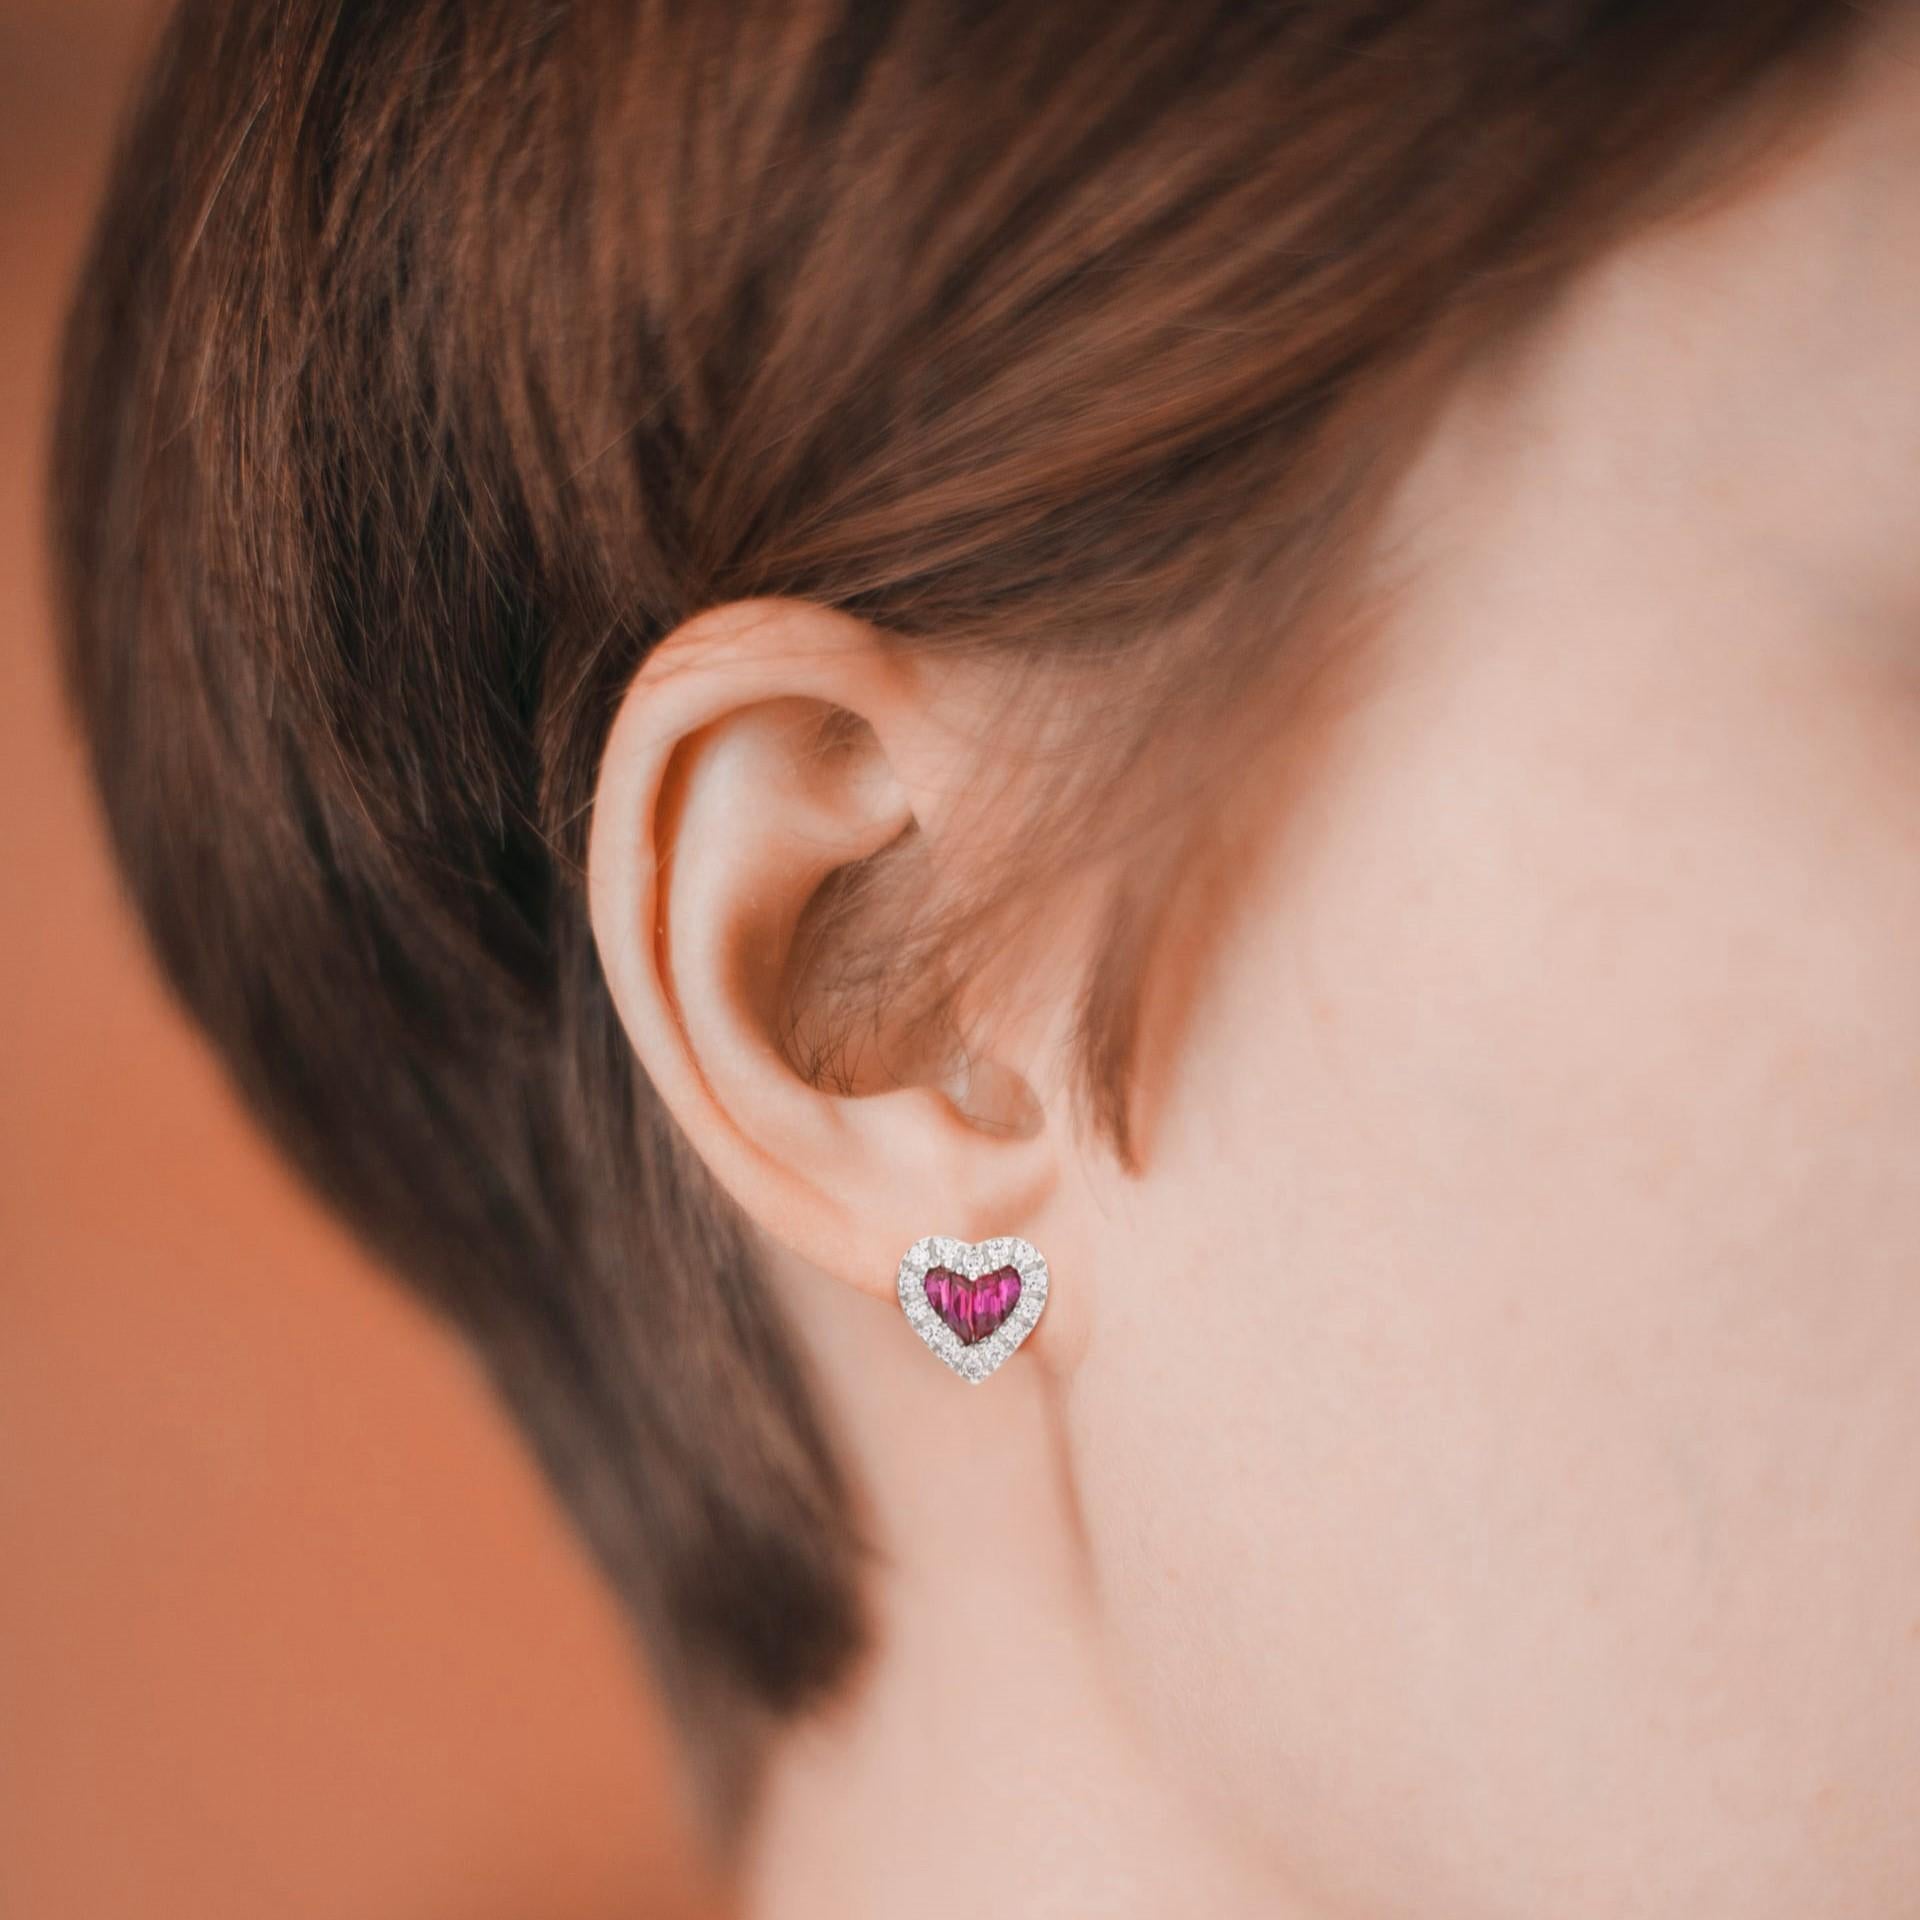 Carry love with you always when you wear these luminous heart shape ruby and diamond earrings. These simple yet meaningful heart earrings are an ideal gift for the one you love.

Information
Metal: 14K White Gold
Width: 10 mm.
Length: 10 mm.
Weight: